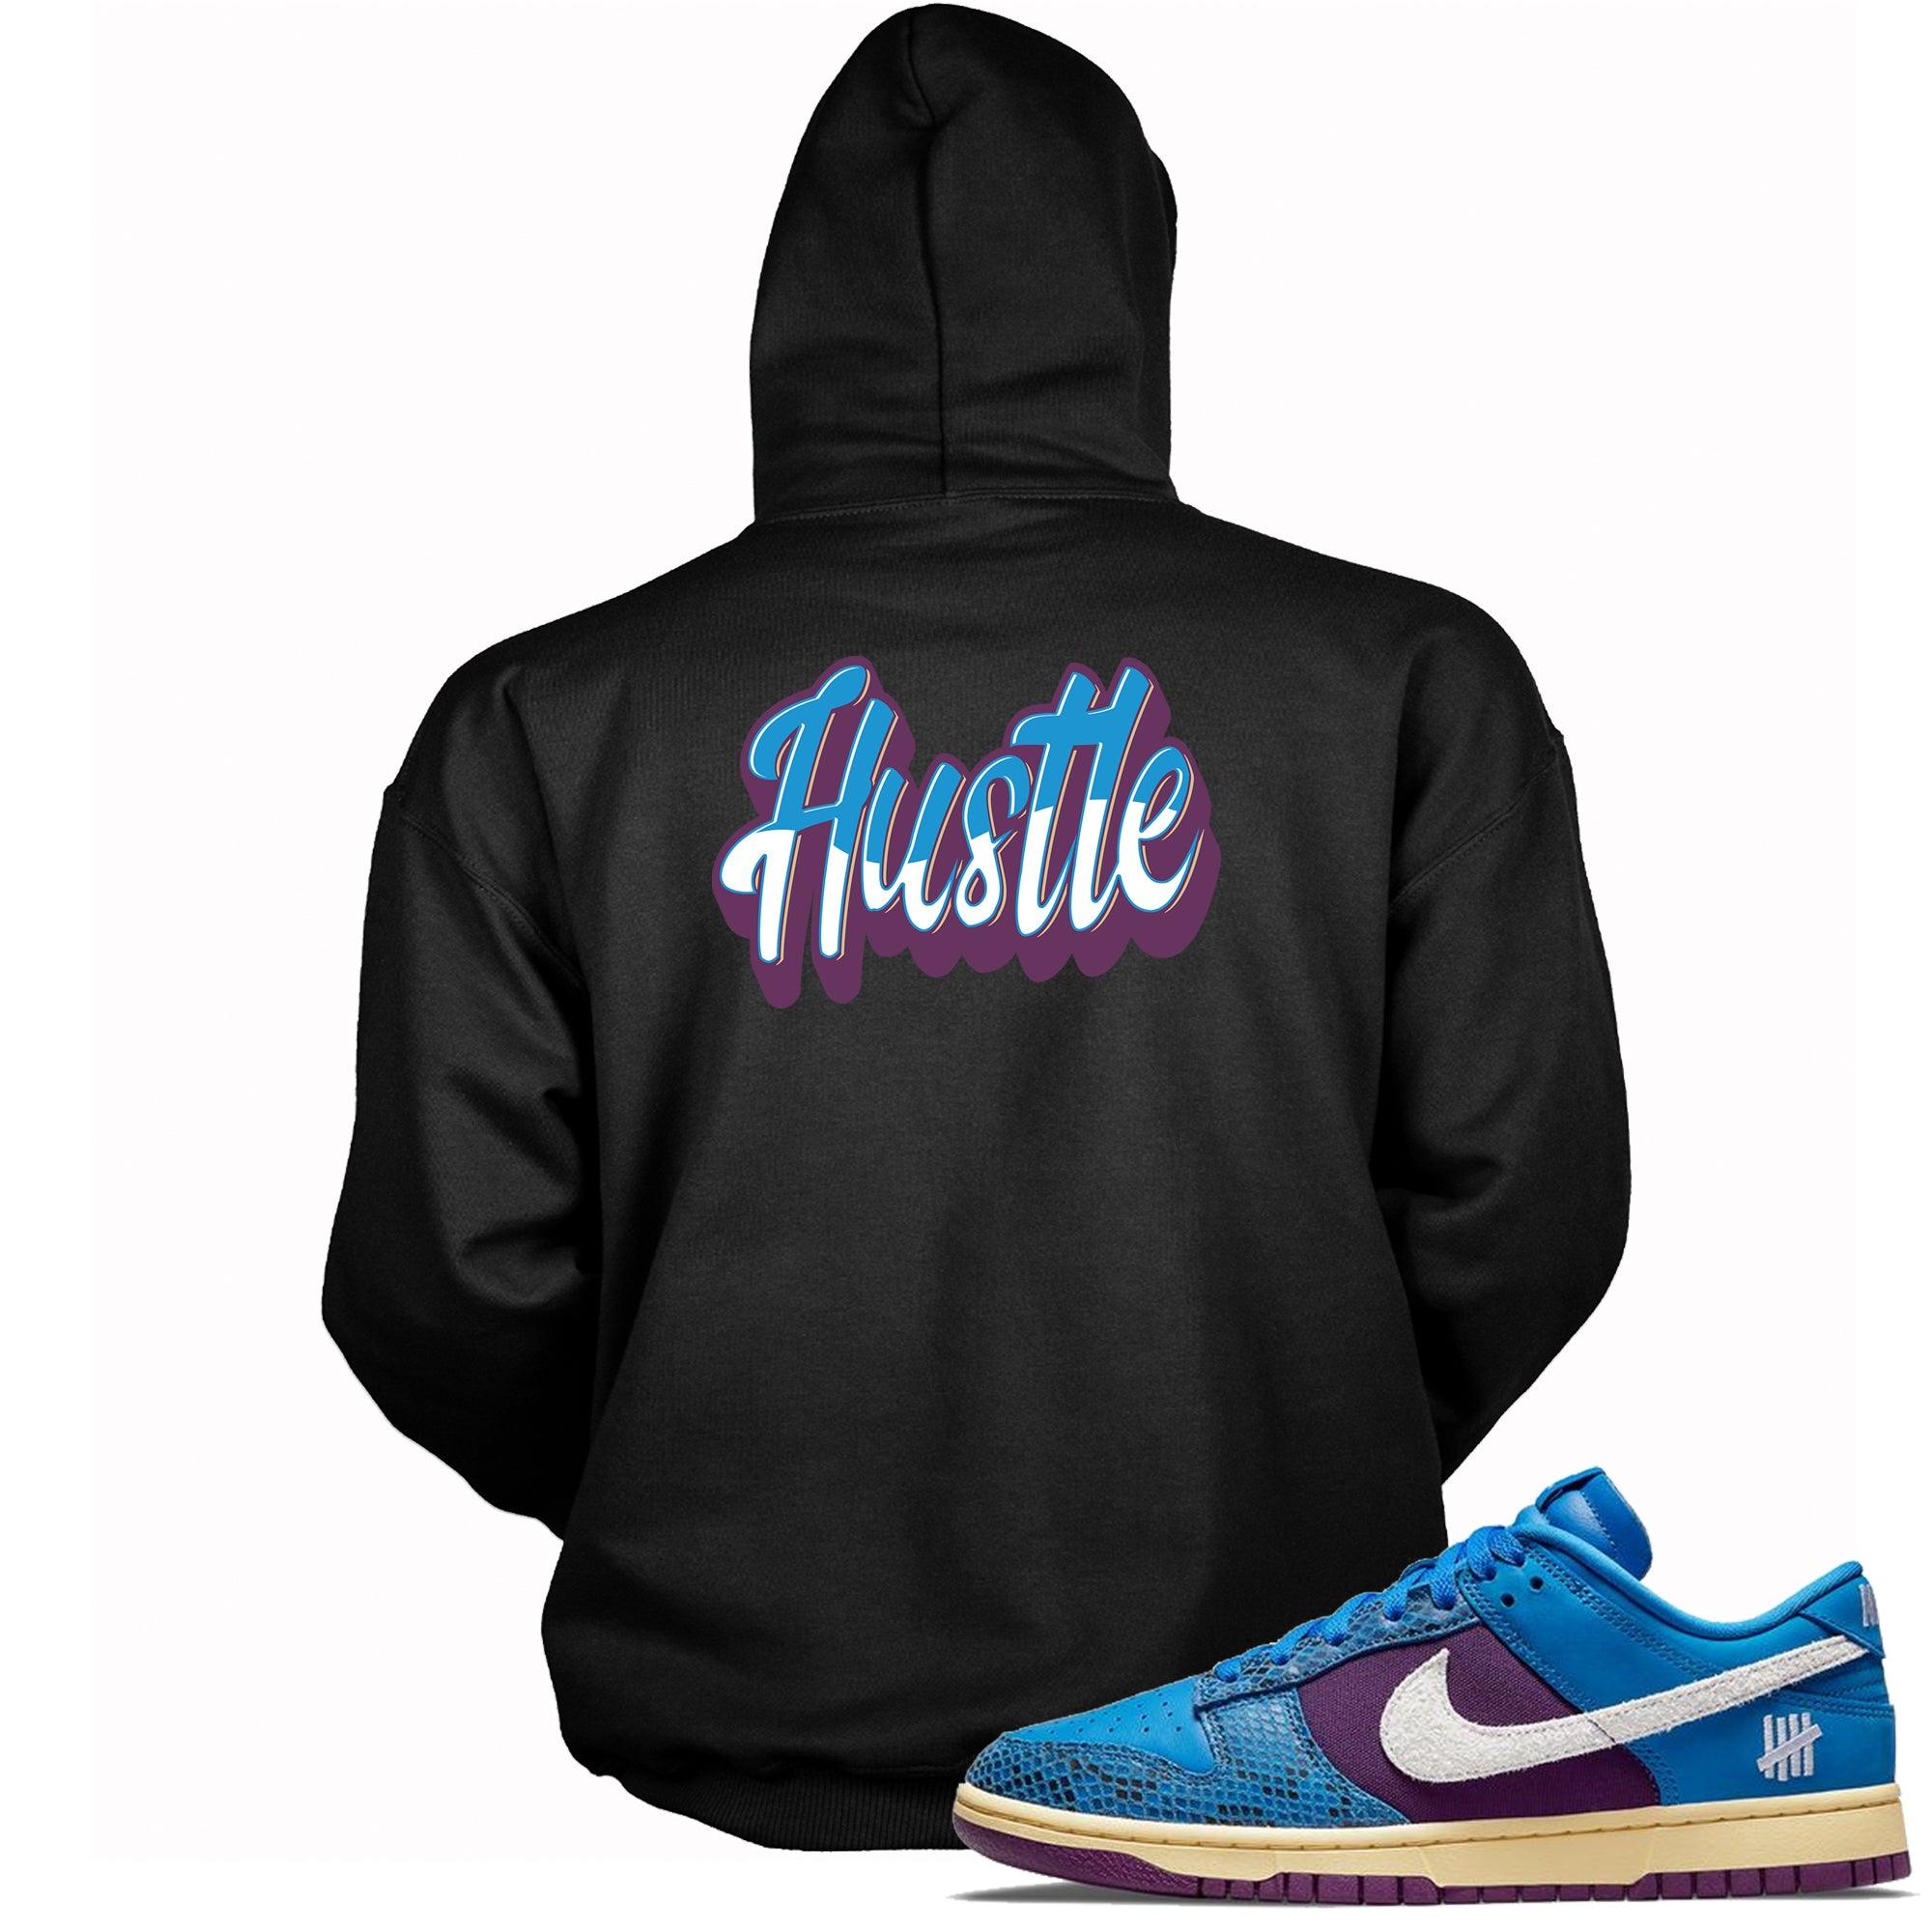 Black Hustle Hoodie Nike Dunks Low Undefeated 5 On It Dunk vs AF1 photo